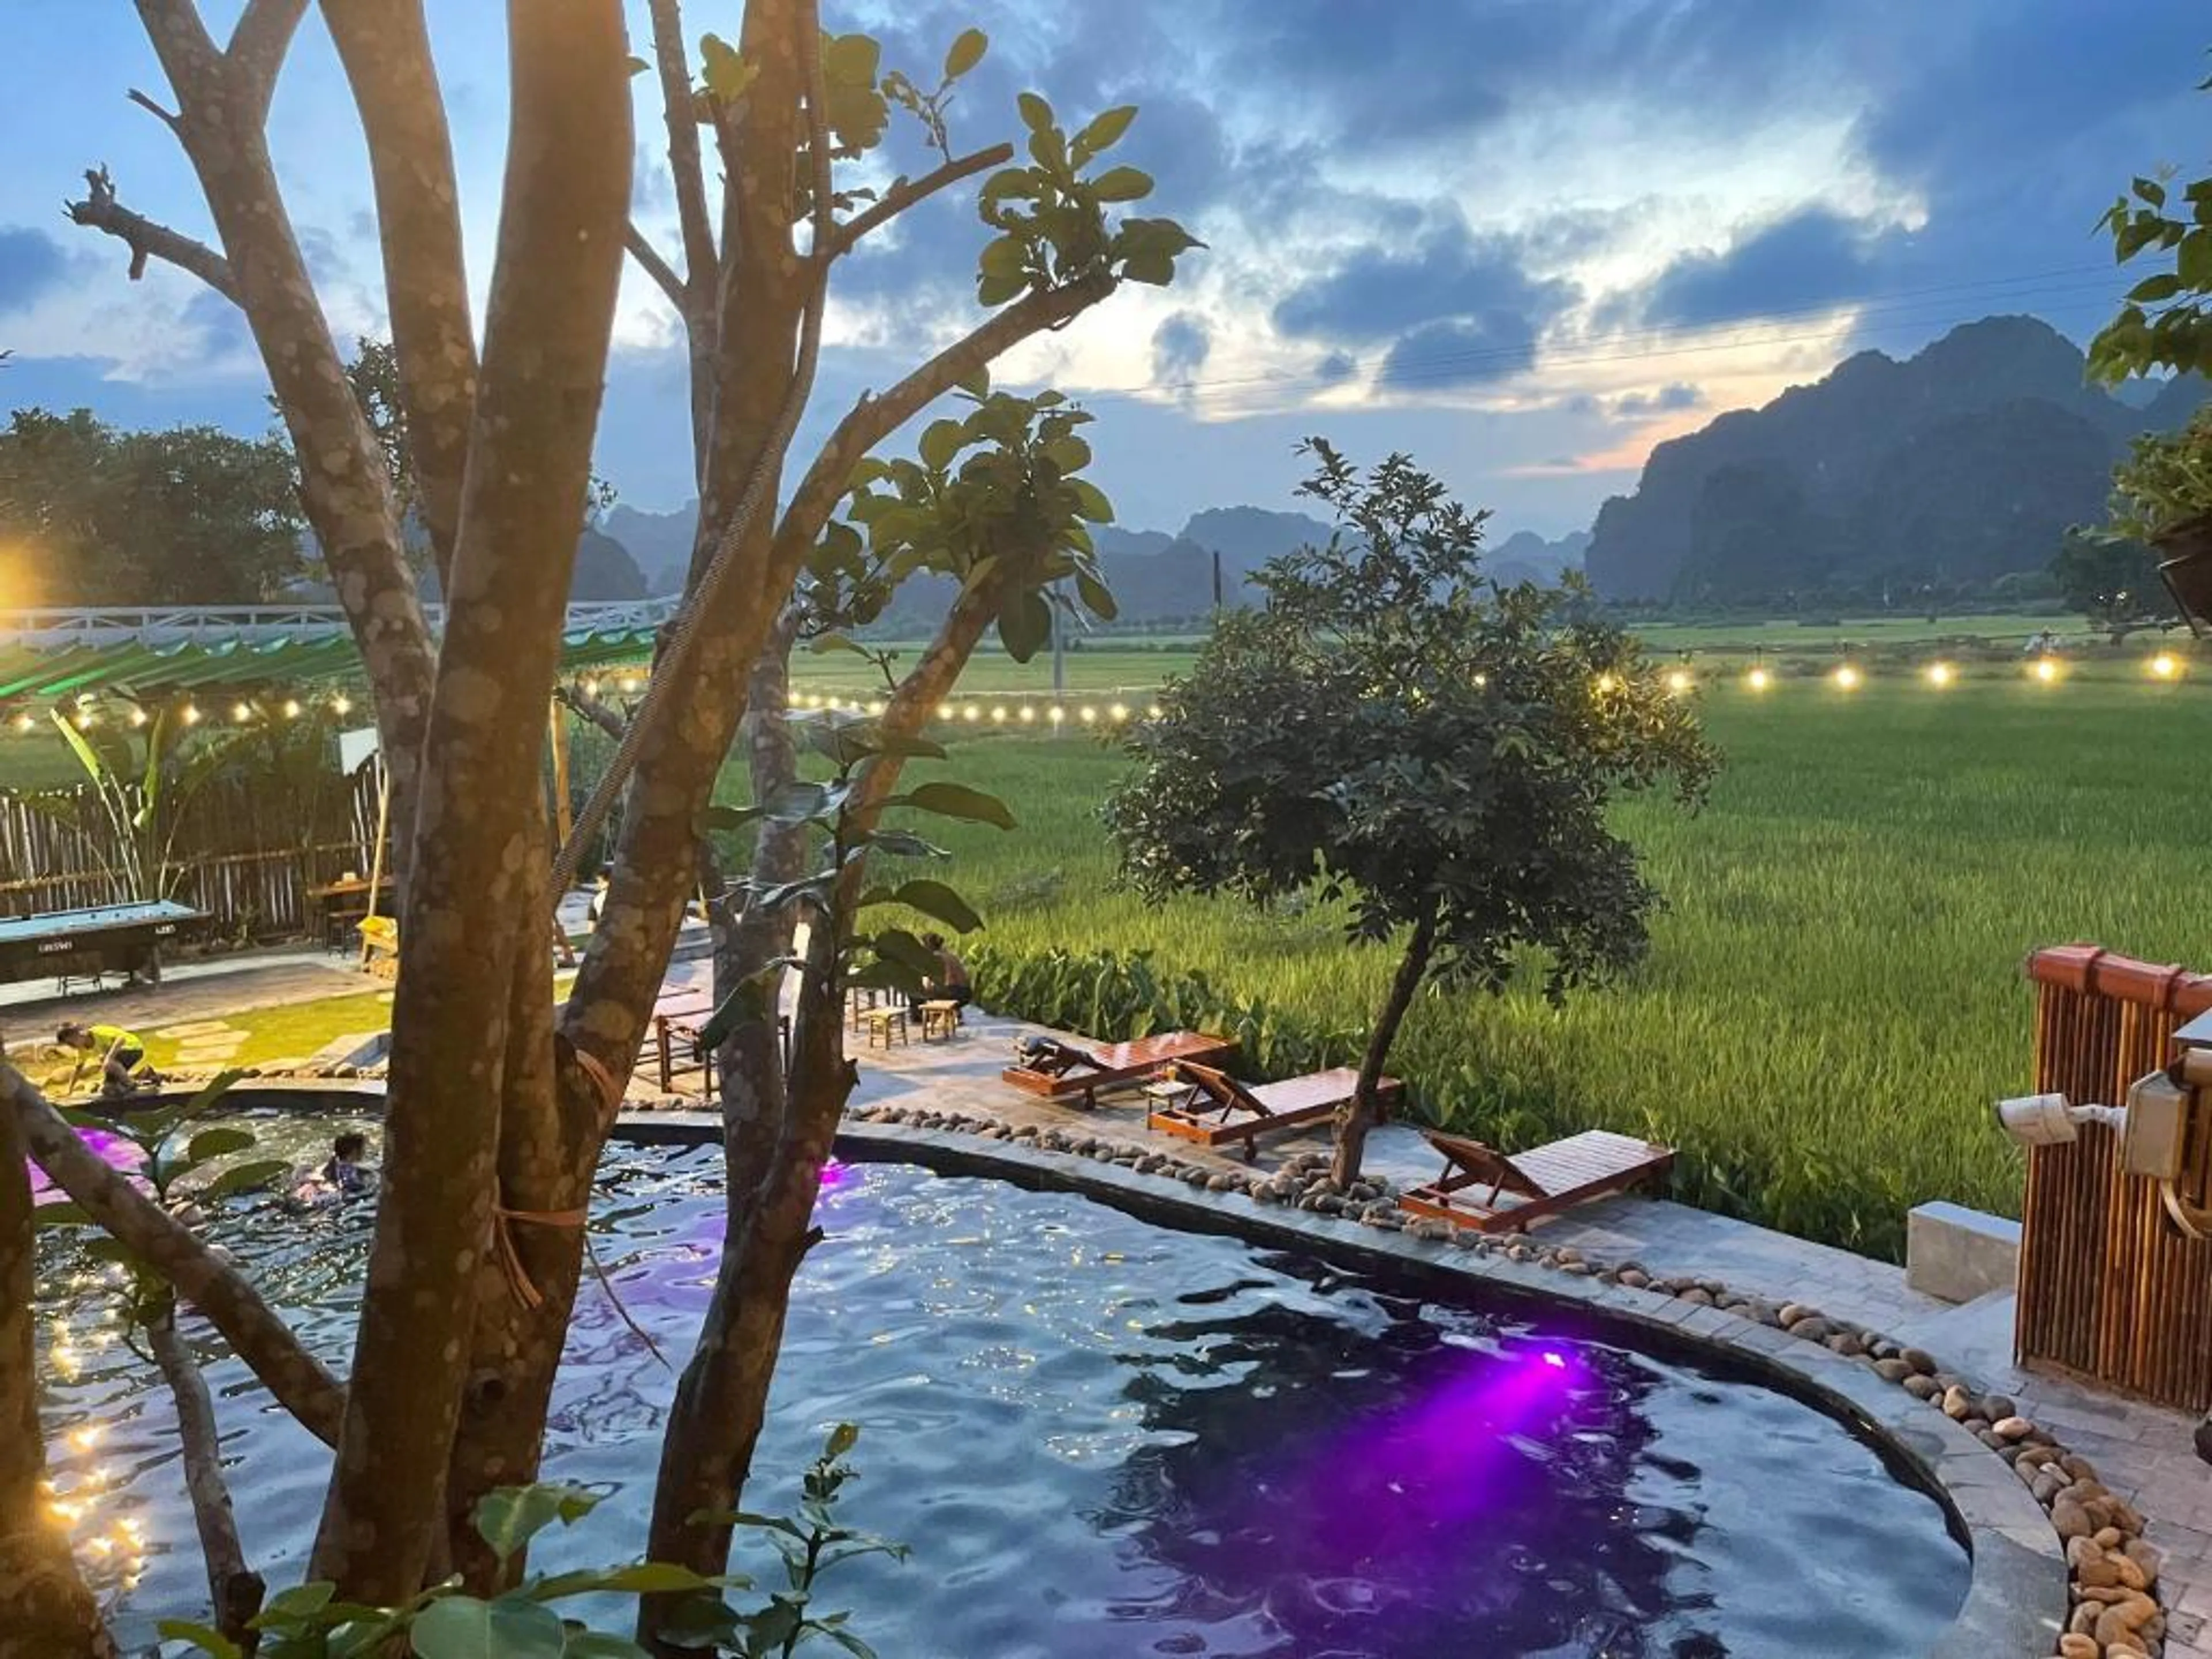 Weekend Retreat at Bai Dinh: Top 8 Ideal Hotels for Your Stay